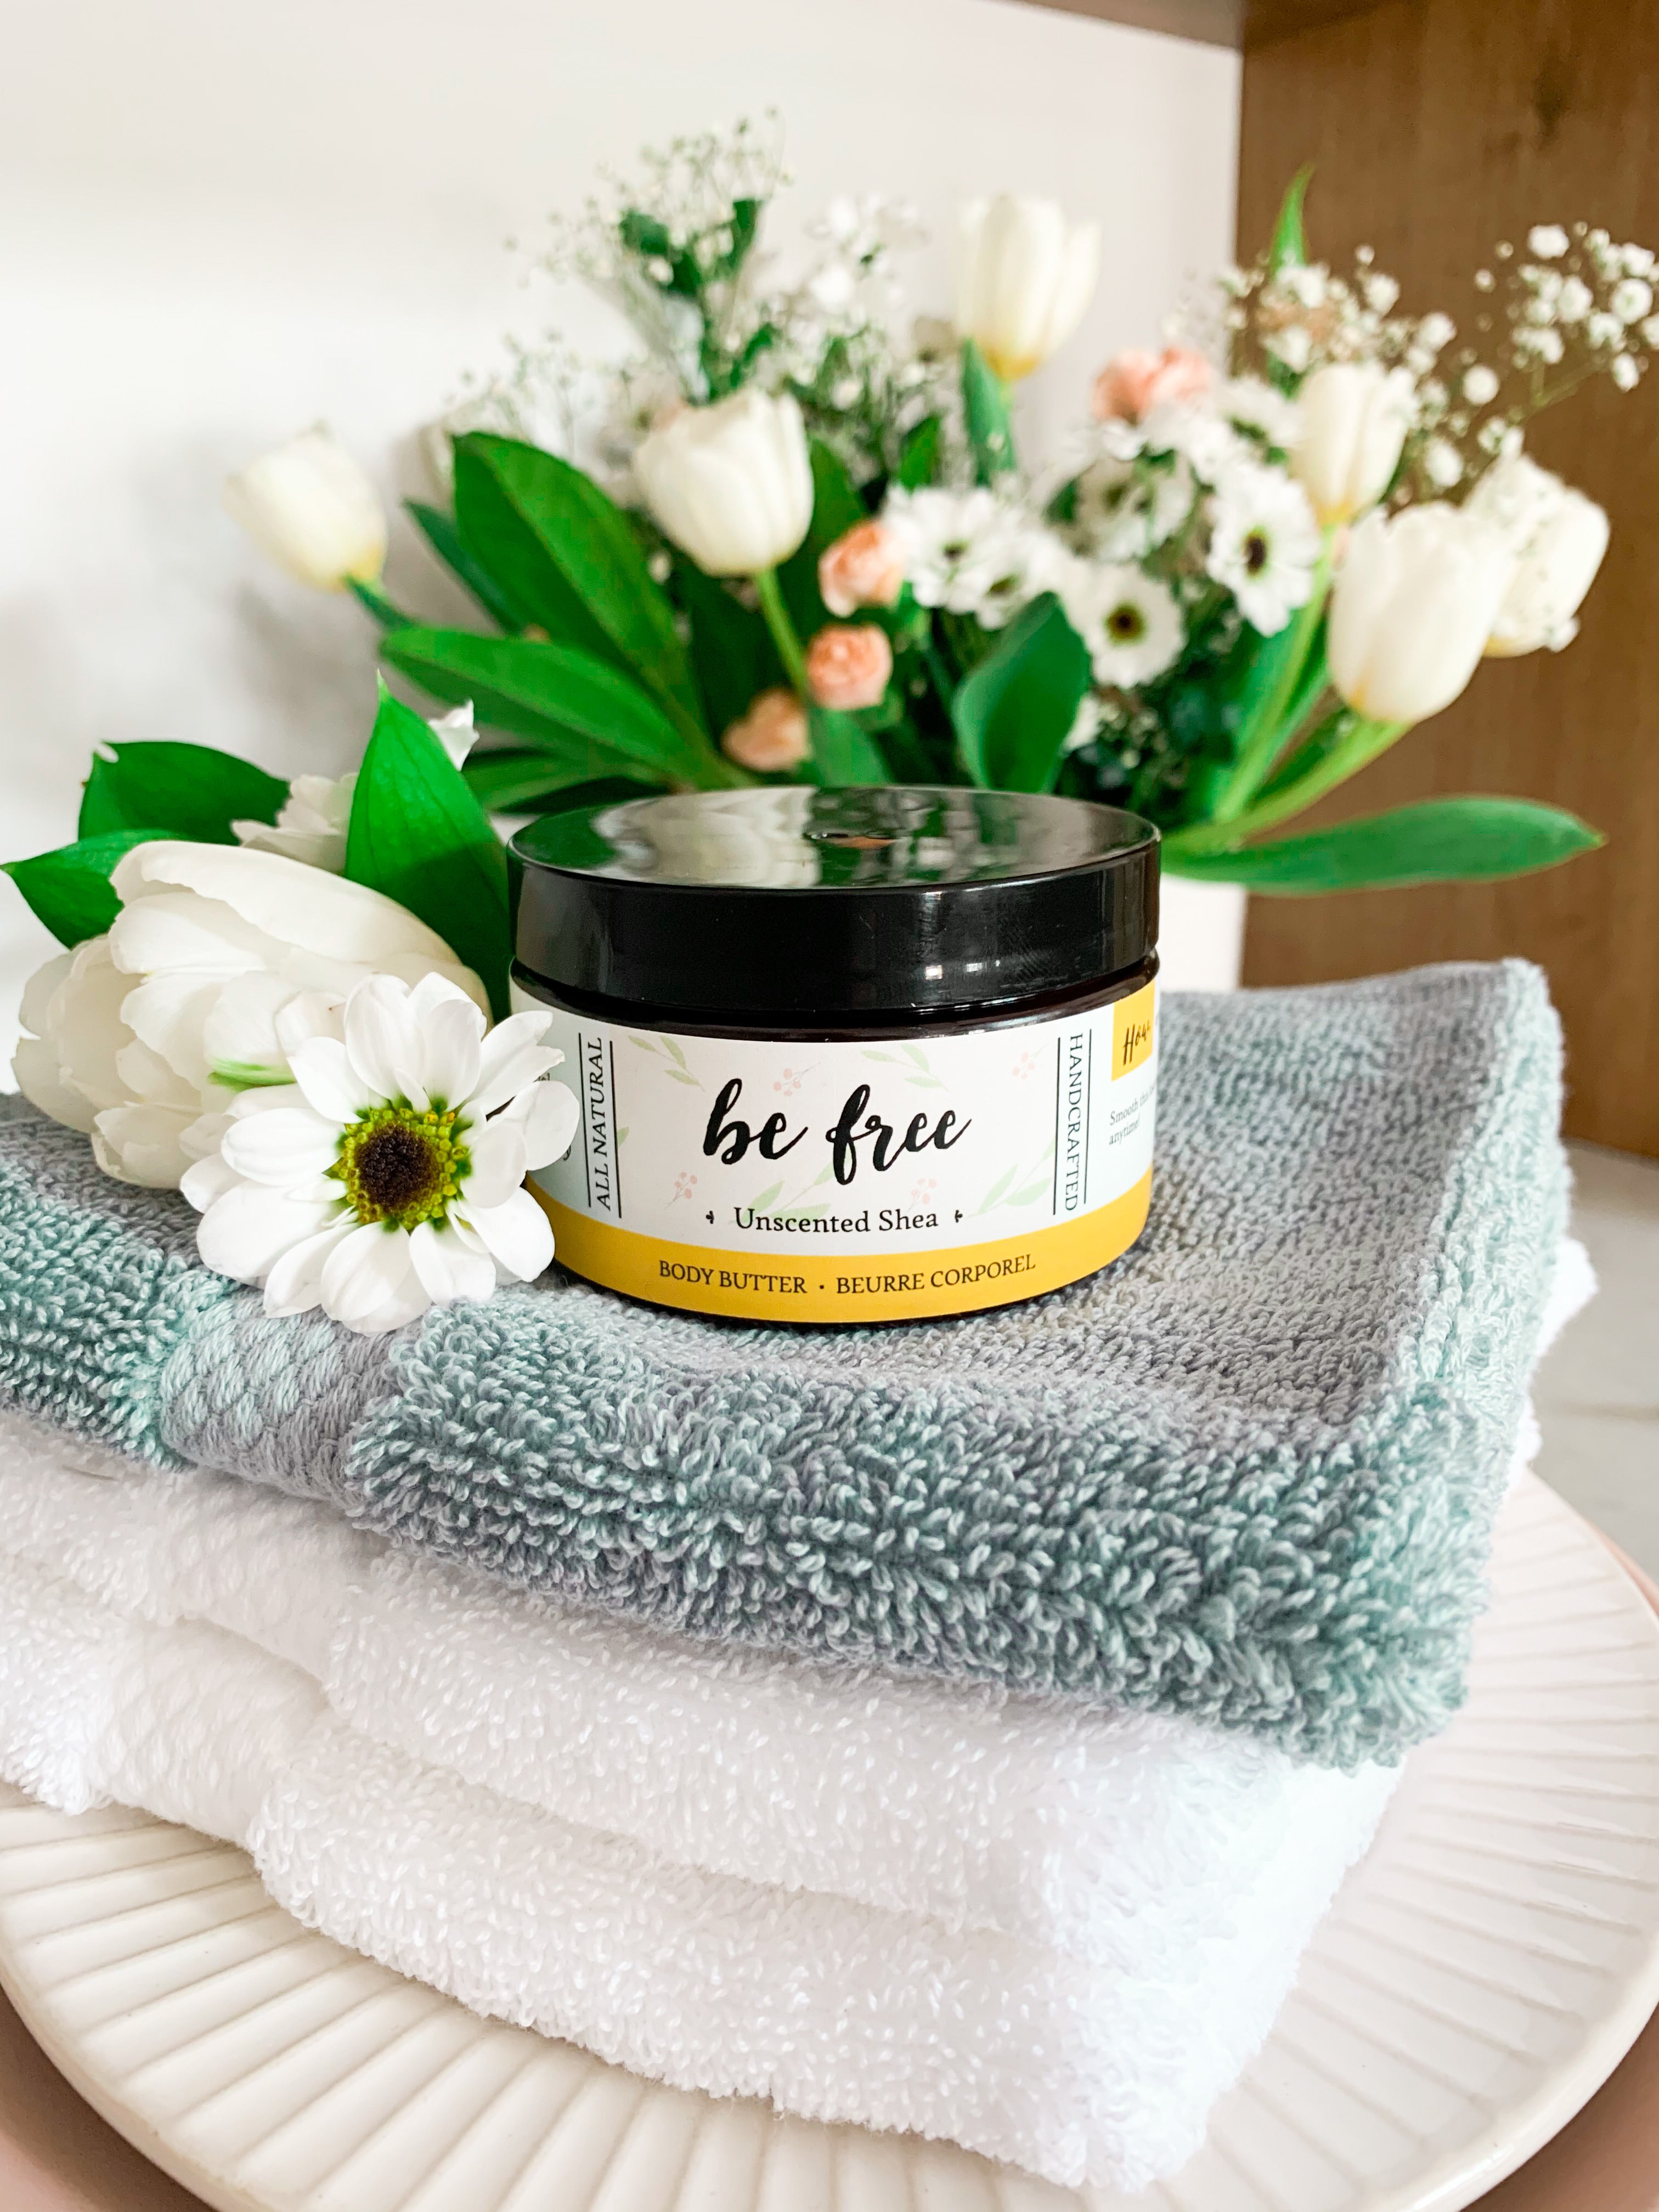 Be Free - Unscented Shea Butter (for sensitive skin types)